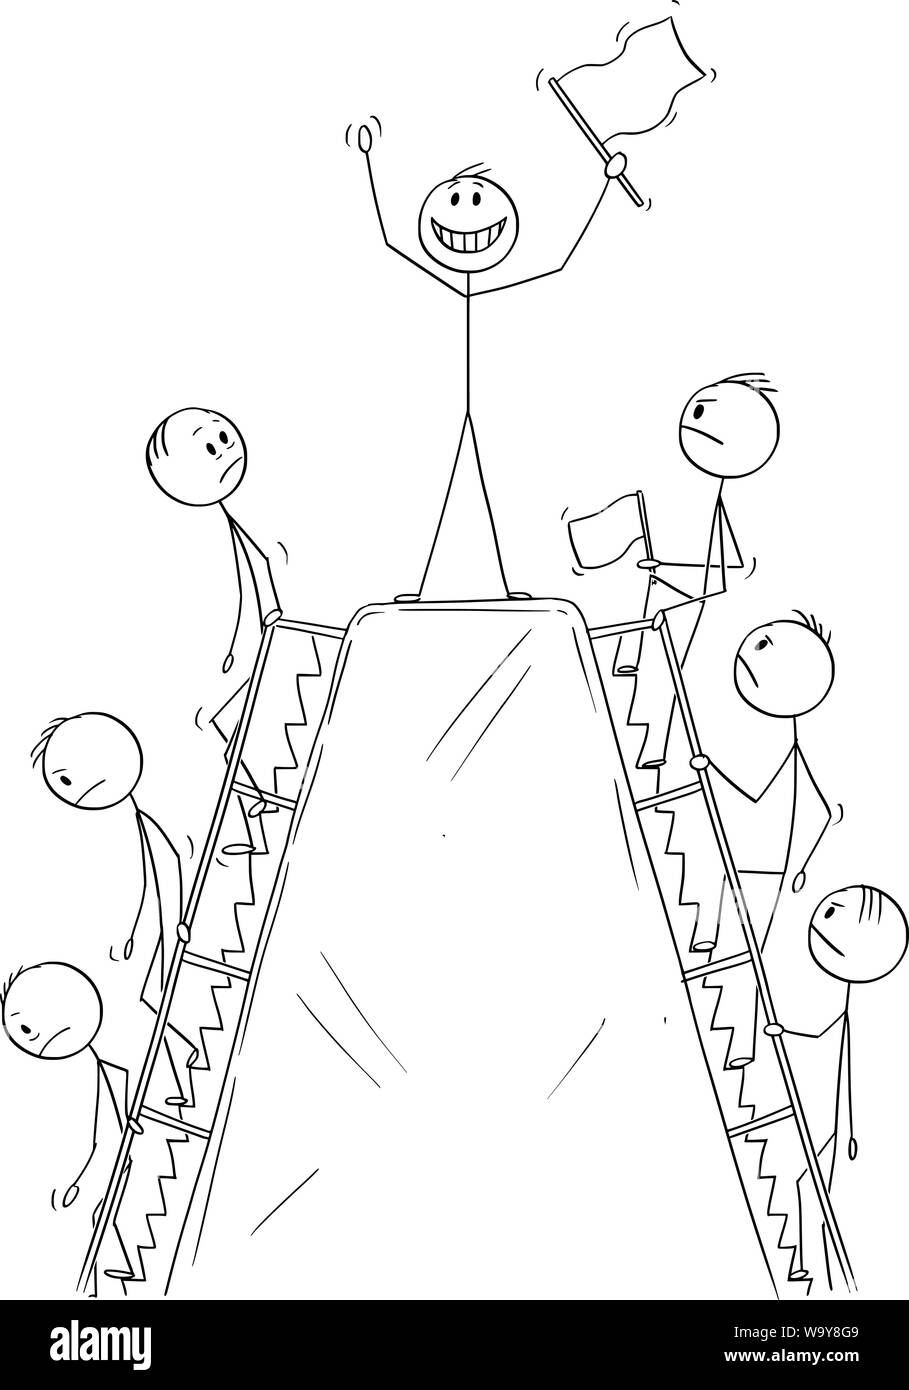 Vector cartoon stick figure drawing conceptual illustration of line of men, or businessmen climbing the hill to enjoy moment of success on the peak before going down. Stock Vector